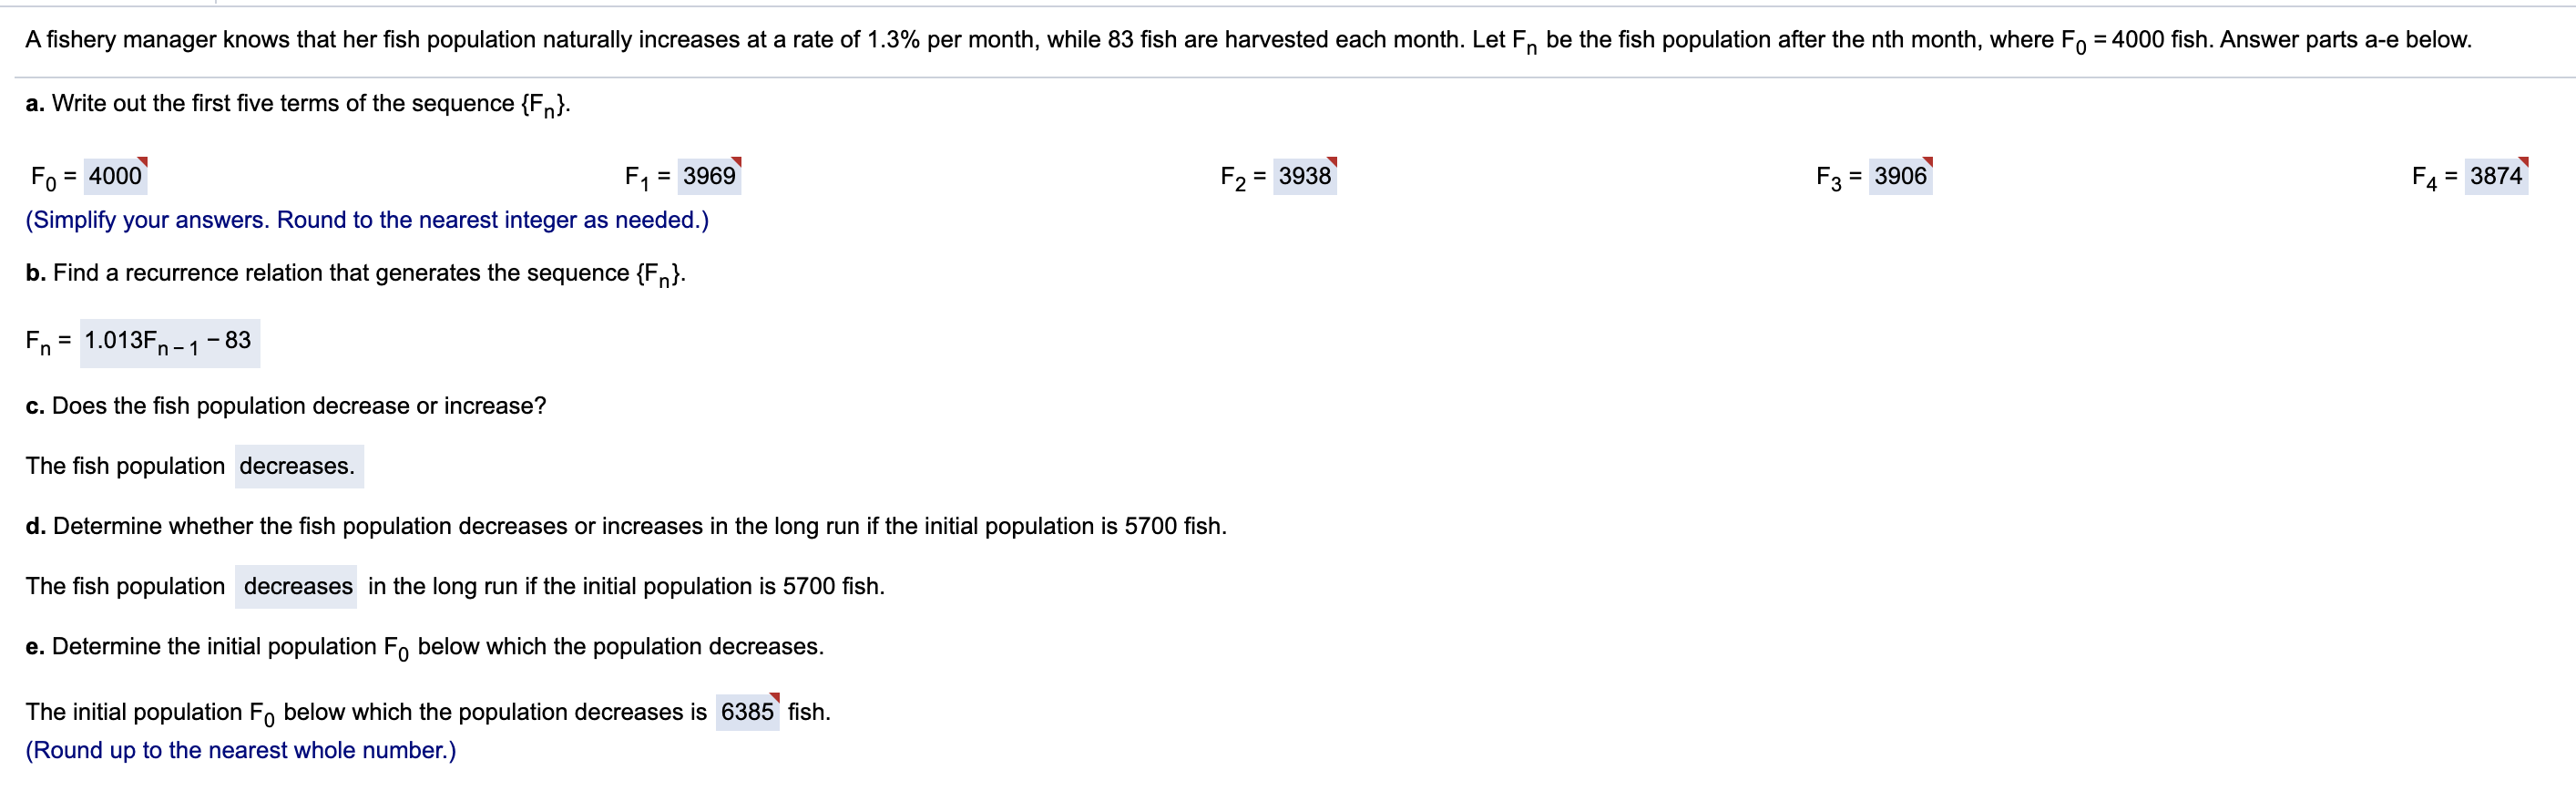 A fishery manager knows that her fish population naturally increases at a rate of 1.3% per month, while 83 fish are harvested each month. Let F, be the fish population after the nth month, where F, = 4000 fish. Answer parts a-e below.
a. Write out the first five terms of the sequence {Fn}.
Fo
= 4000
F1
= 3969
F2
= 3938
F3
= 3906
F4
= 3874
(Simplify your answers. Round to the nearest integer as needed.)
b. Find a recurrence relation that generates the sequence {Fn}.
Fn = 1.013F,
83
c. Does the fish population decrease or increase?
The fish population decreases.
d. Determine whether the fish population decreases or increases in the long run if the initial population is 5700 fish.
The fish population decreases in the long run if the initial population is 5700 fish.
e. Determine the initial population Fo below which the population decreases.
The initial population Fo below which the population decreases is 6385 fish.
(Round up to the nearest whole number.)
